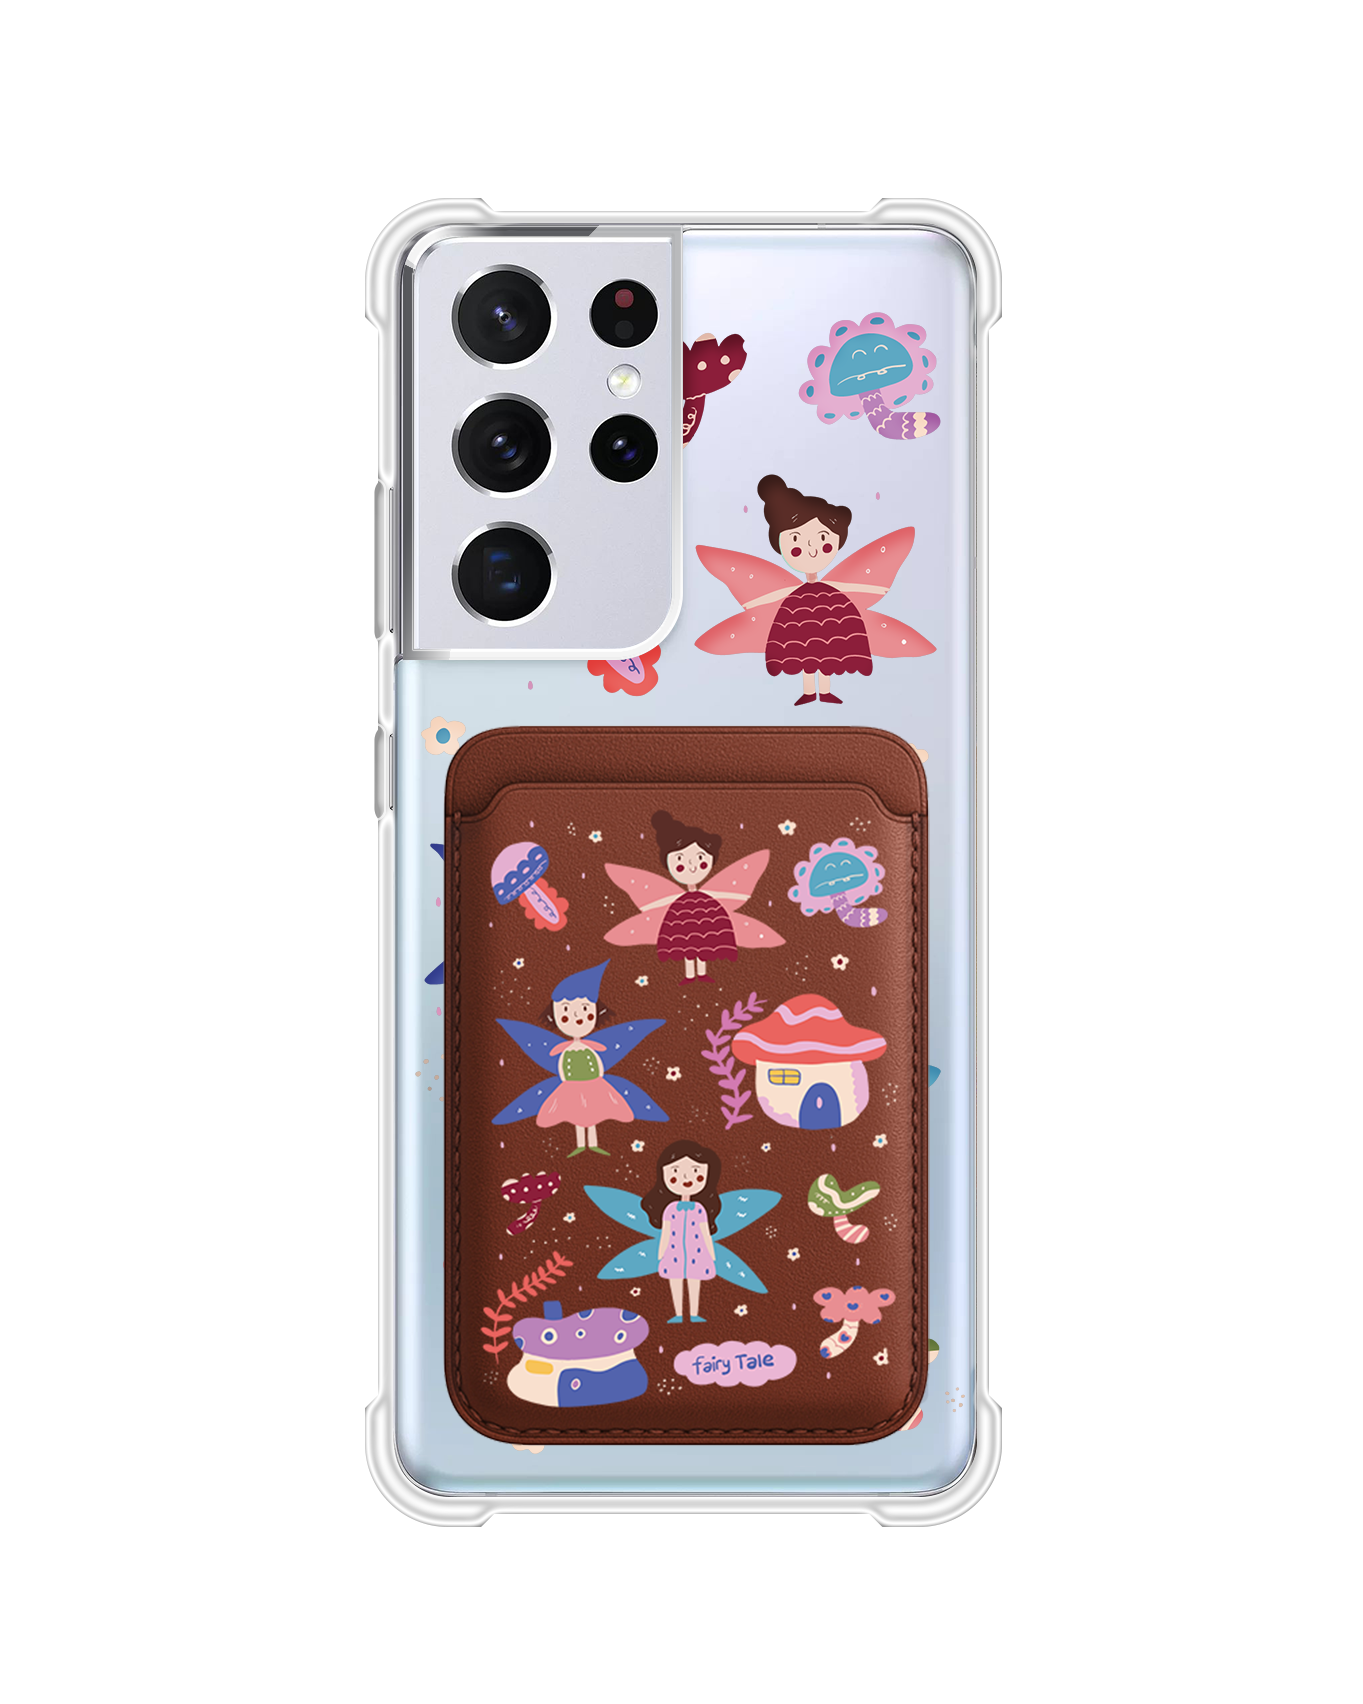 Android Magnetic Wallet Case - Fairytale